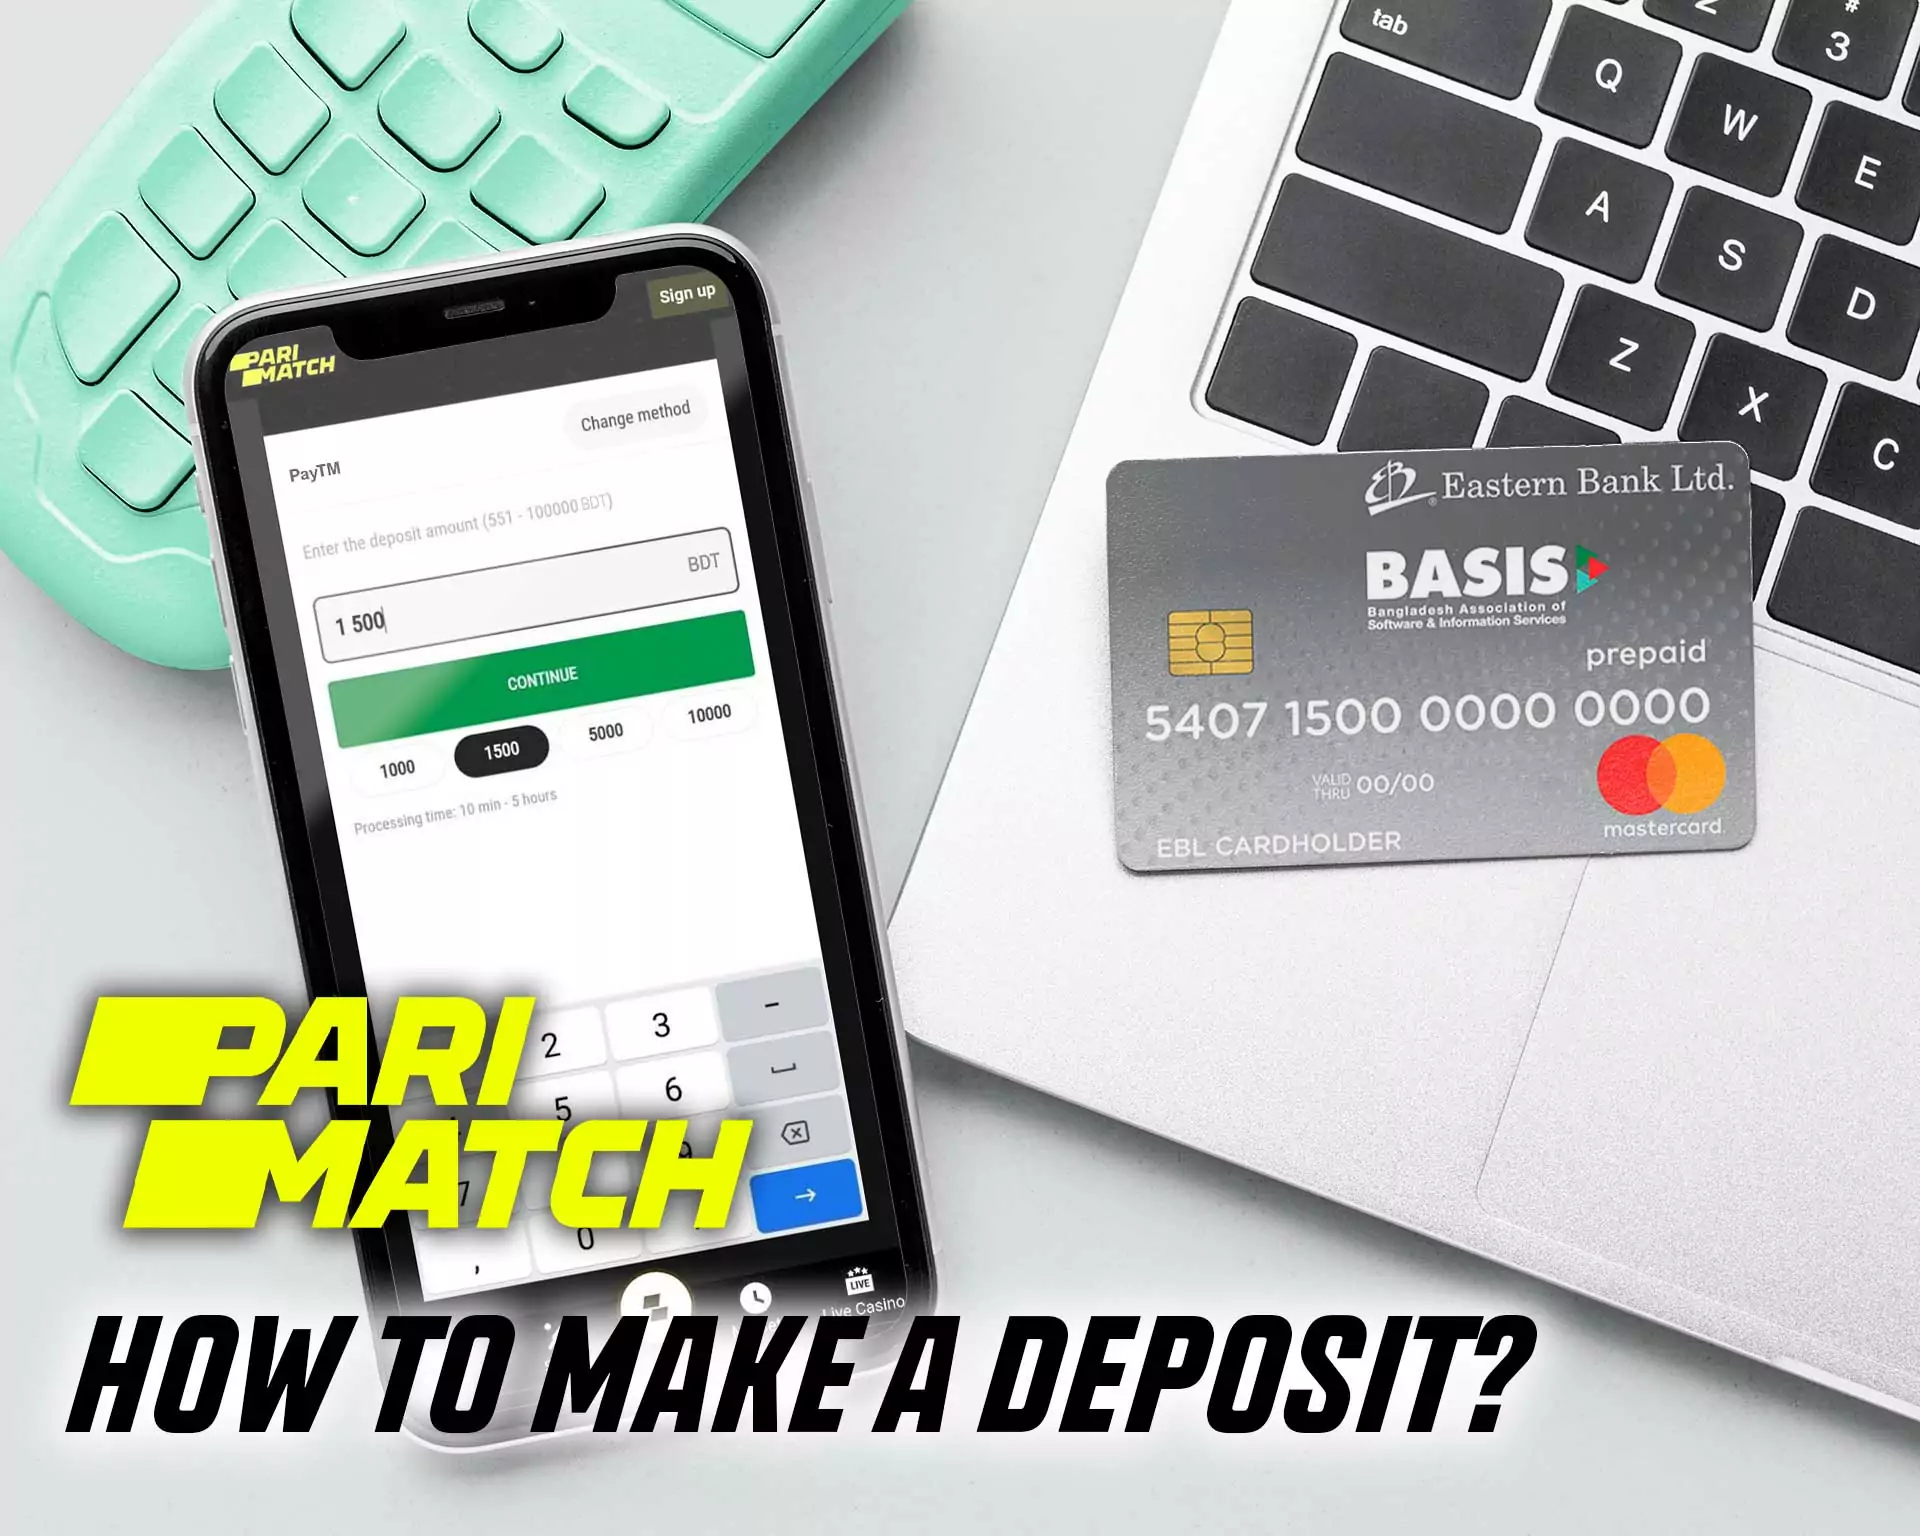 Choose a payment system and enter the deposit amount.